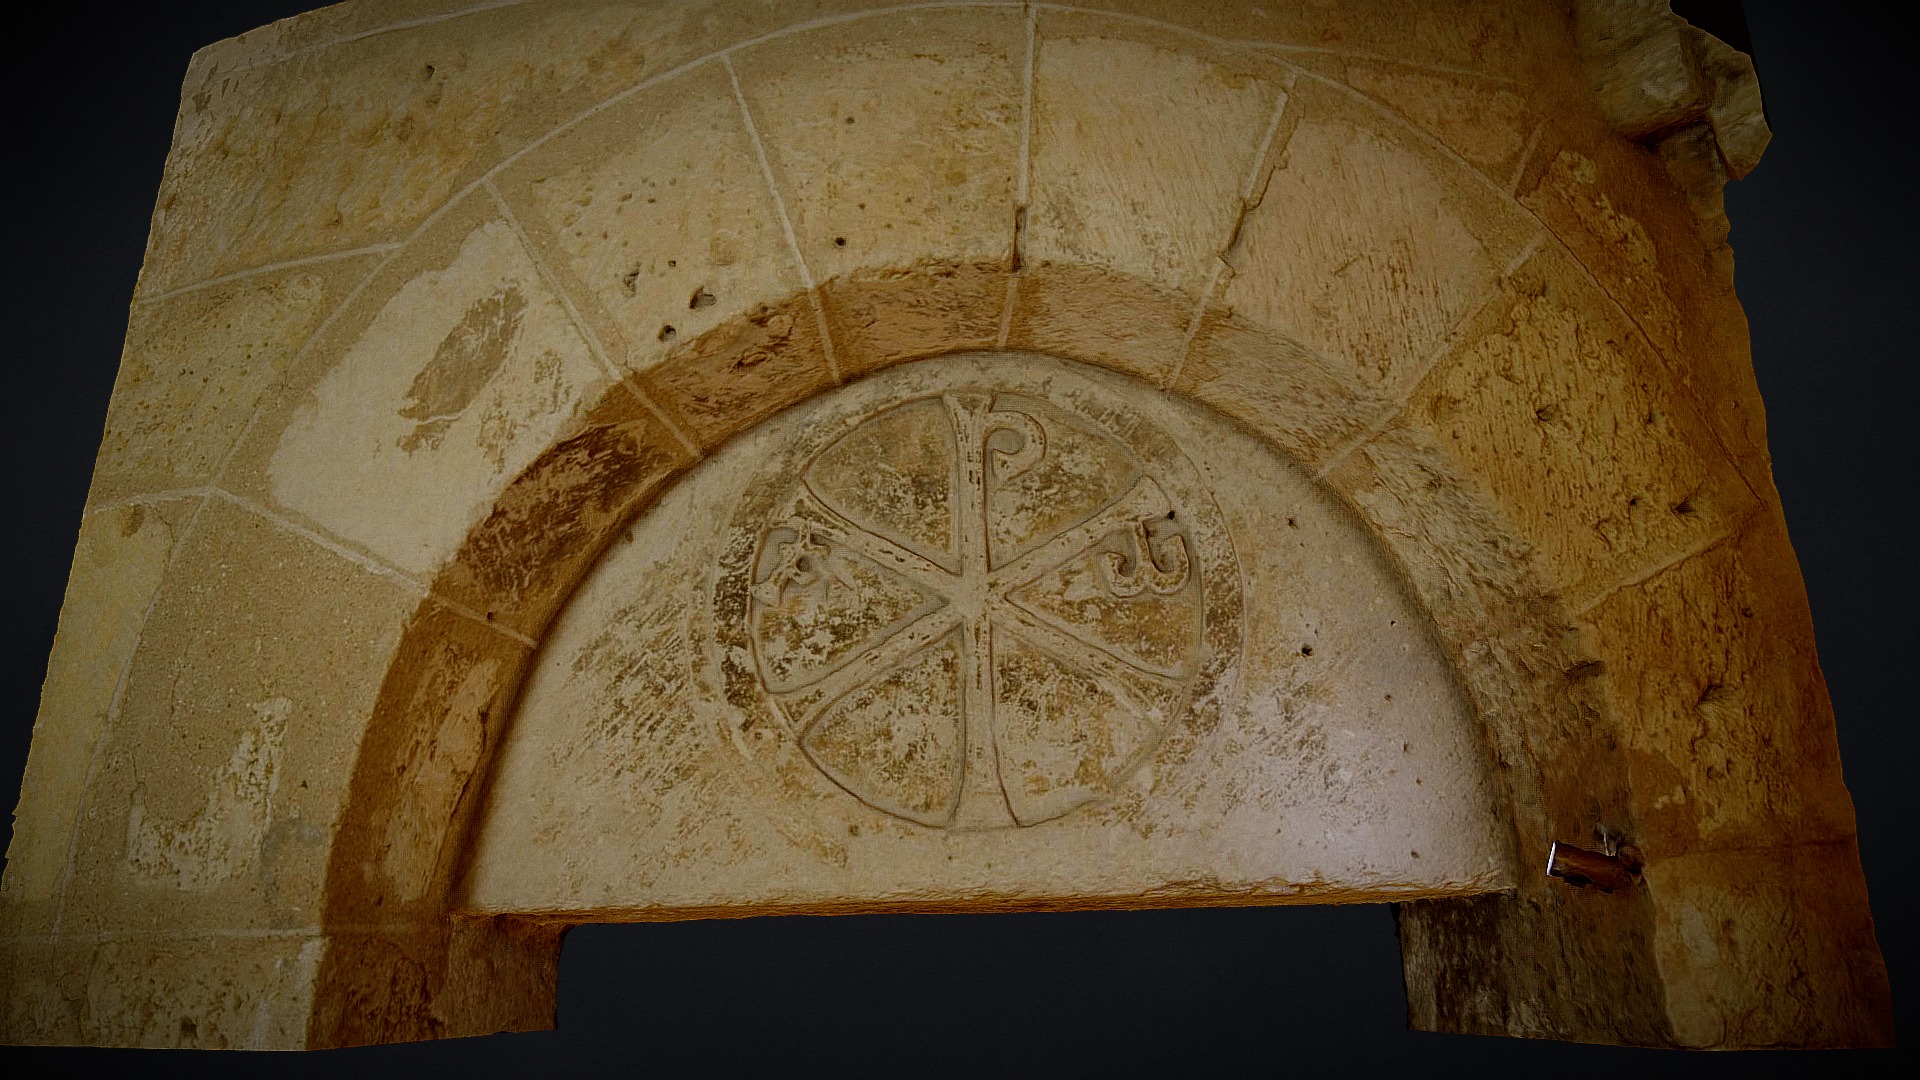 3D model Crismón – San Martín, Frómista - This is a 3D model of the Crismón - San Martín, Frómista. The 3D model is about a circular ceiling with a design.